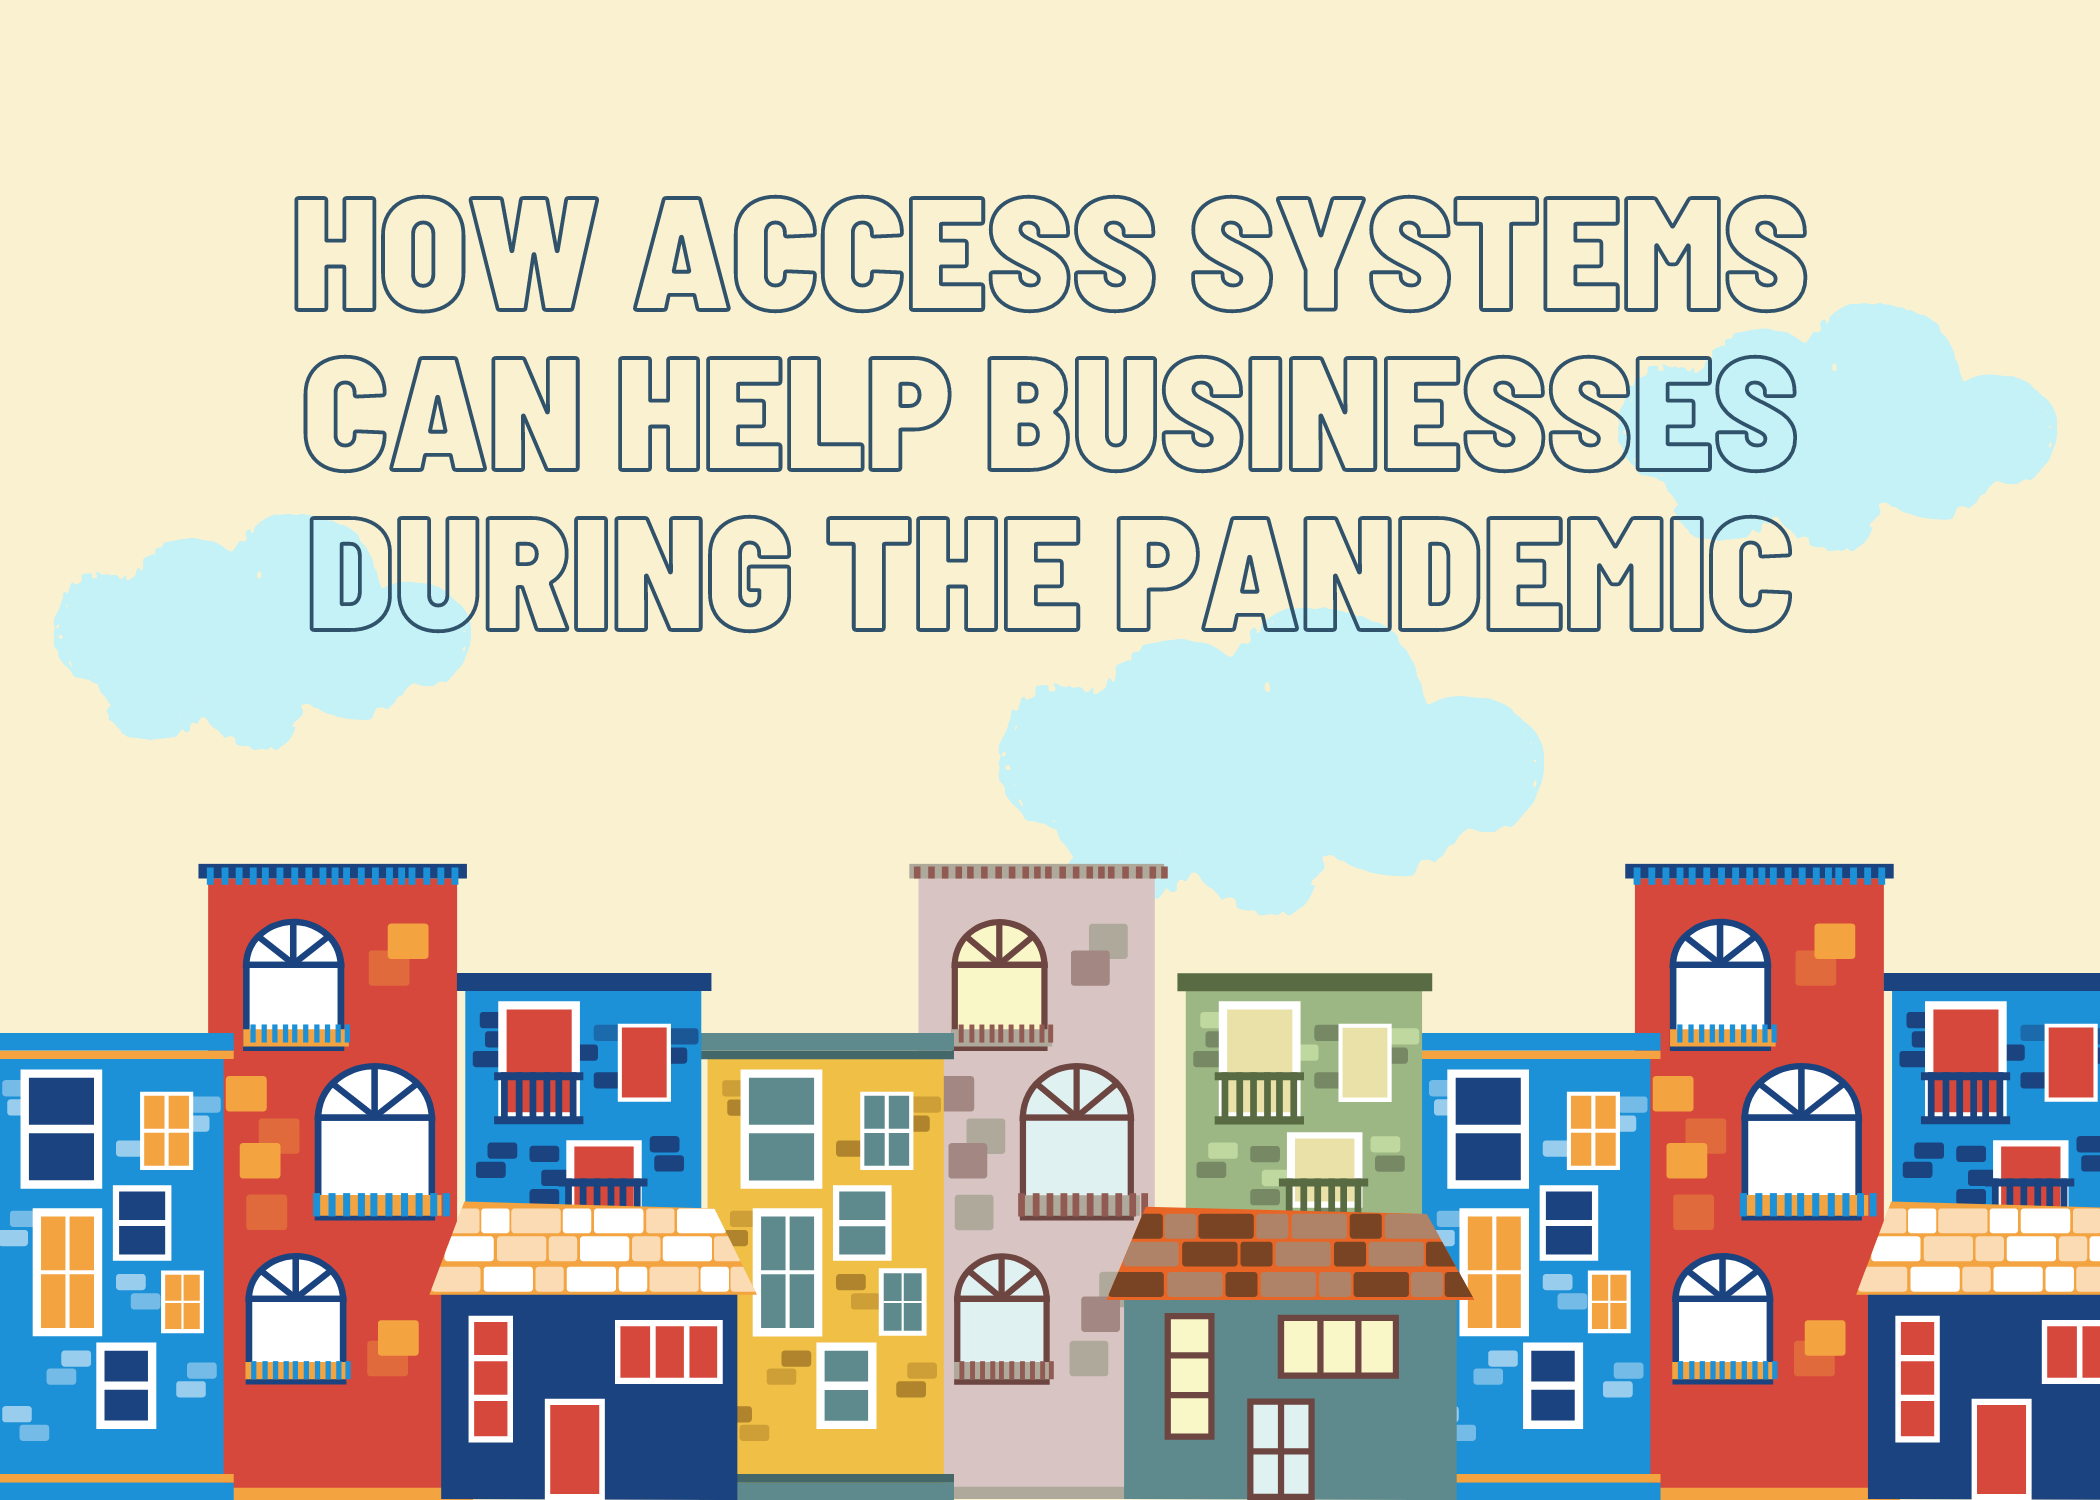 How access systems can help businesses during the pandemic